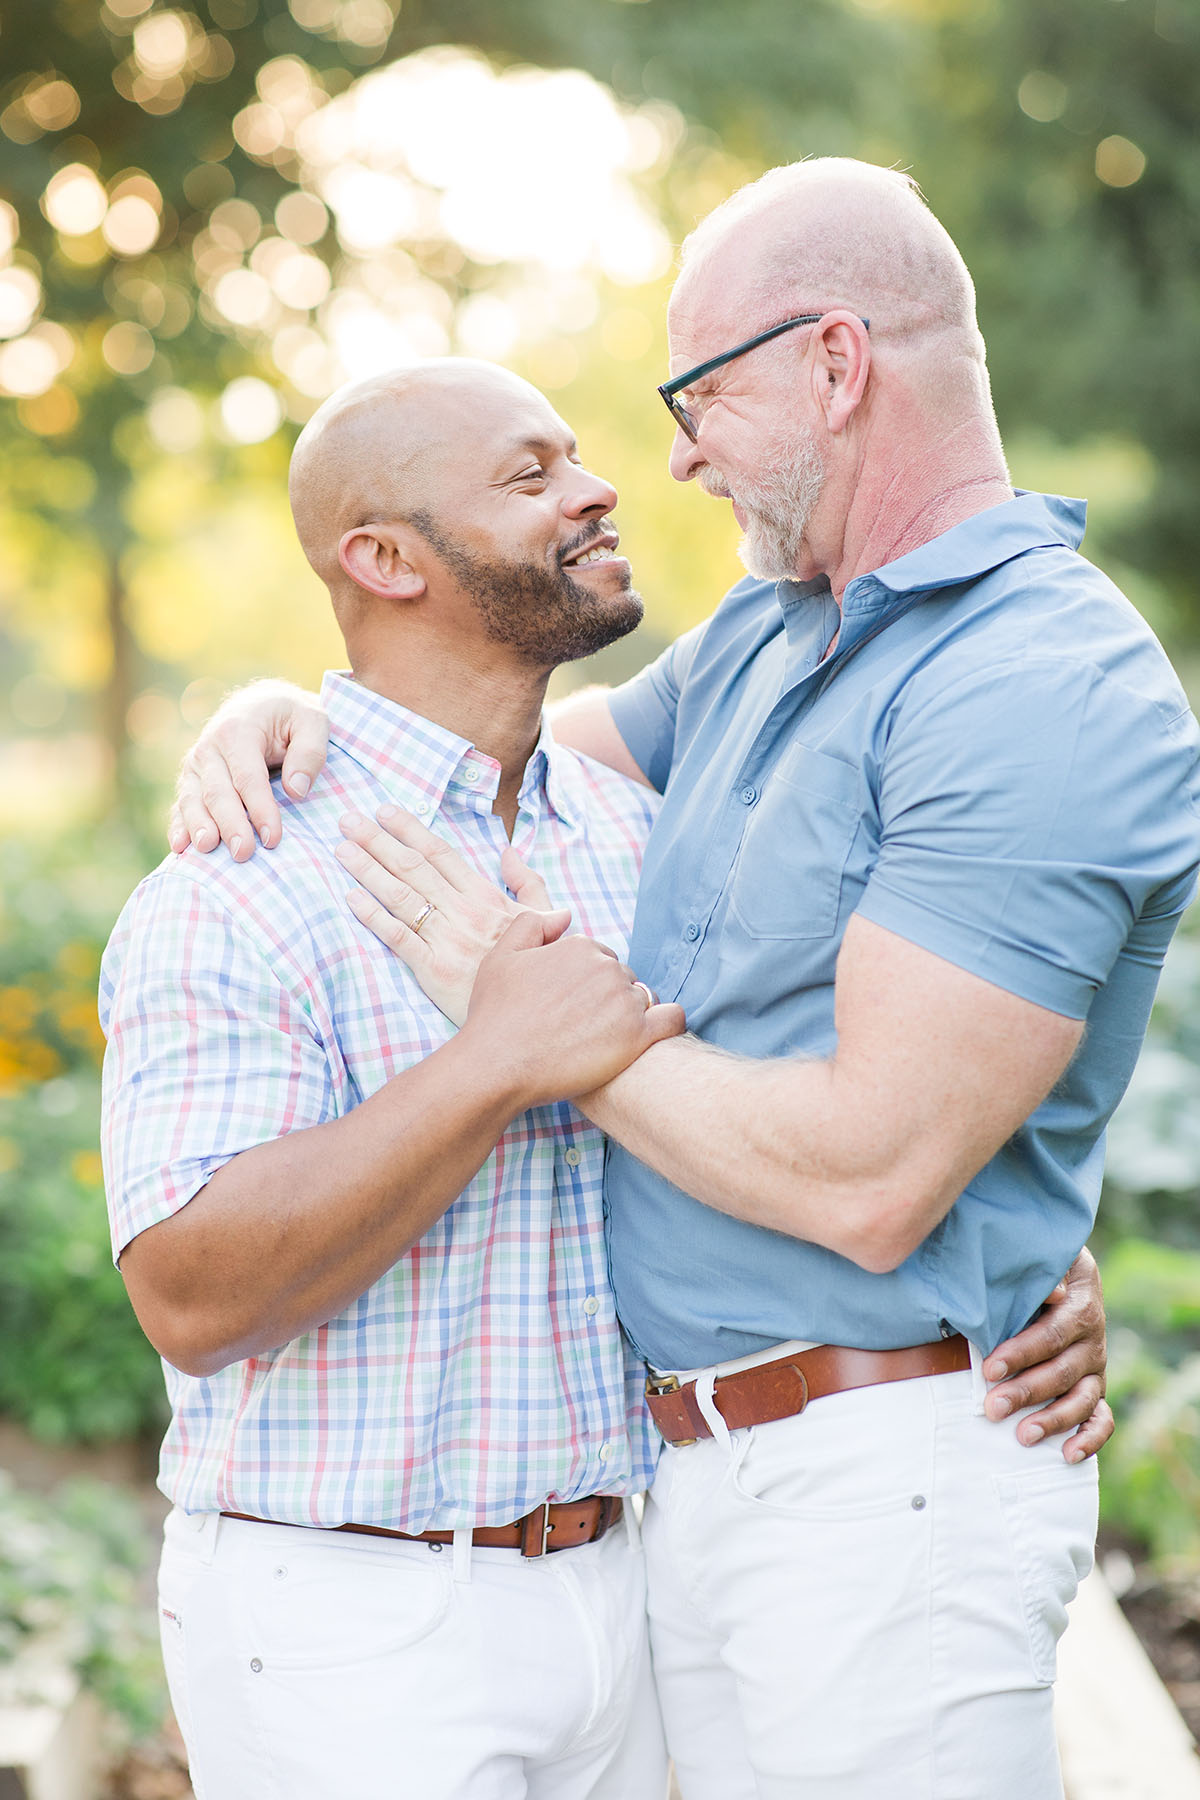 Garden engagement photos at the Franklin Park Conservatory LGBTQ+ weddings two grooms engagement gay outdoors nature